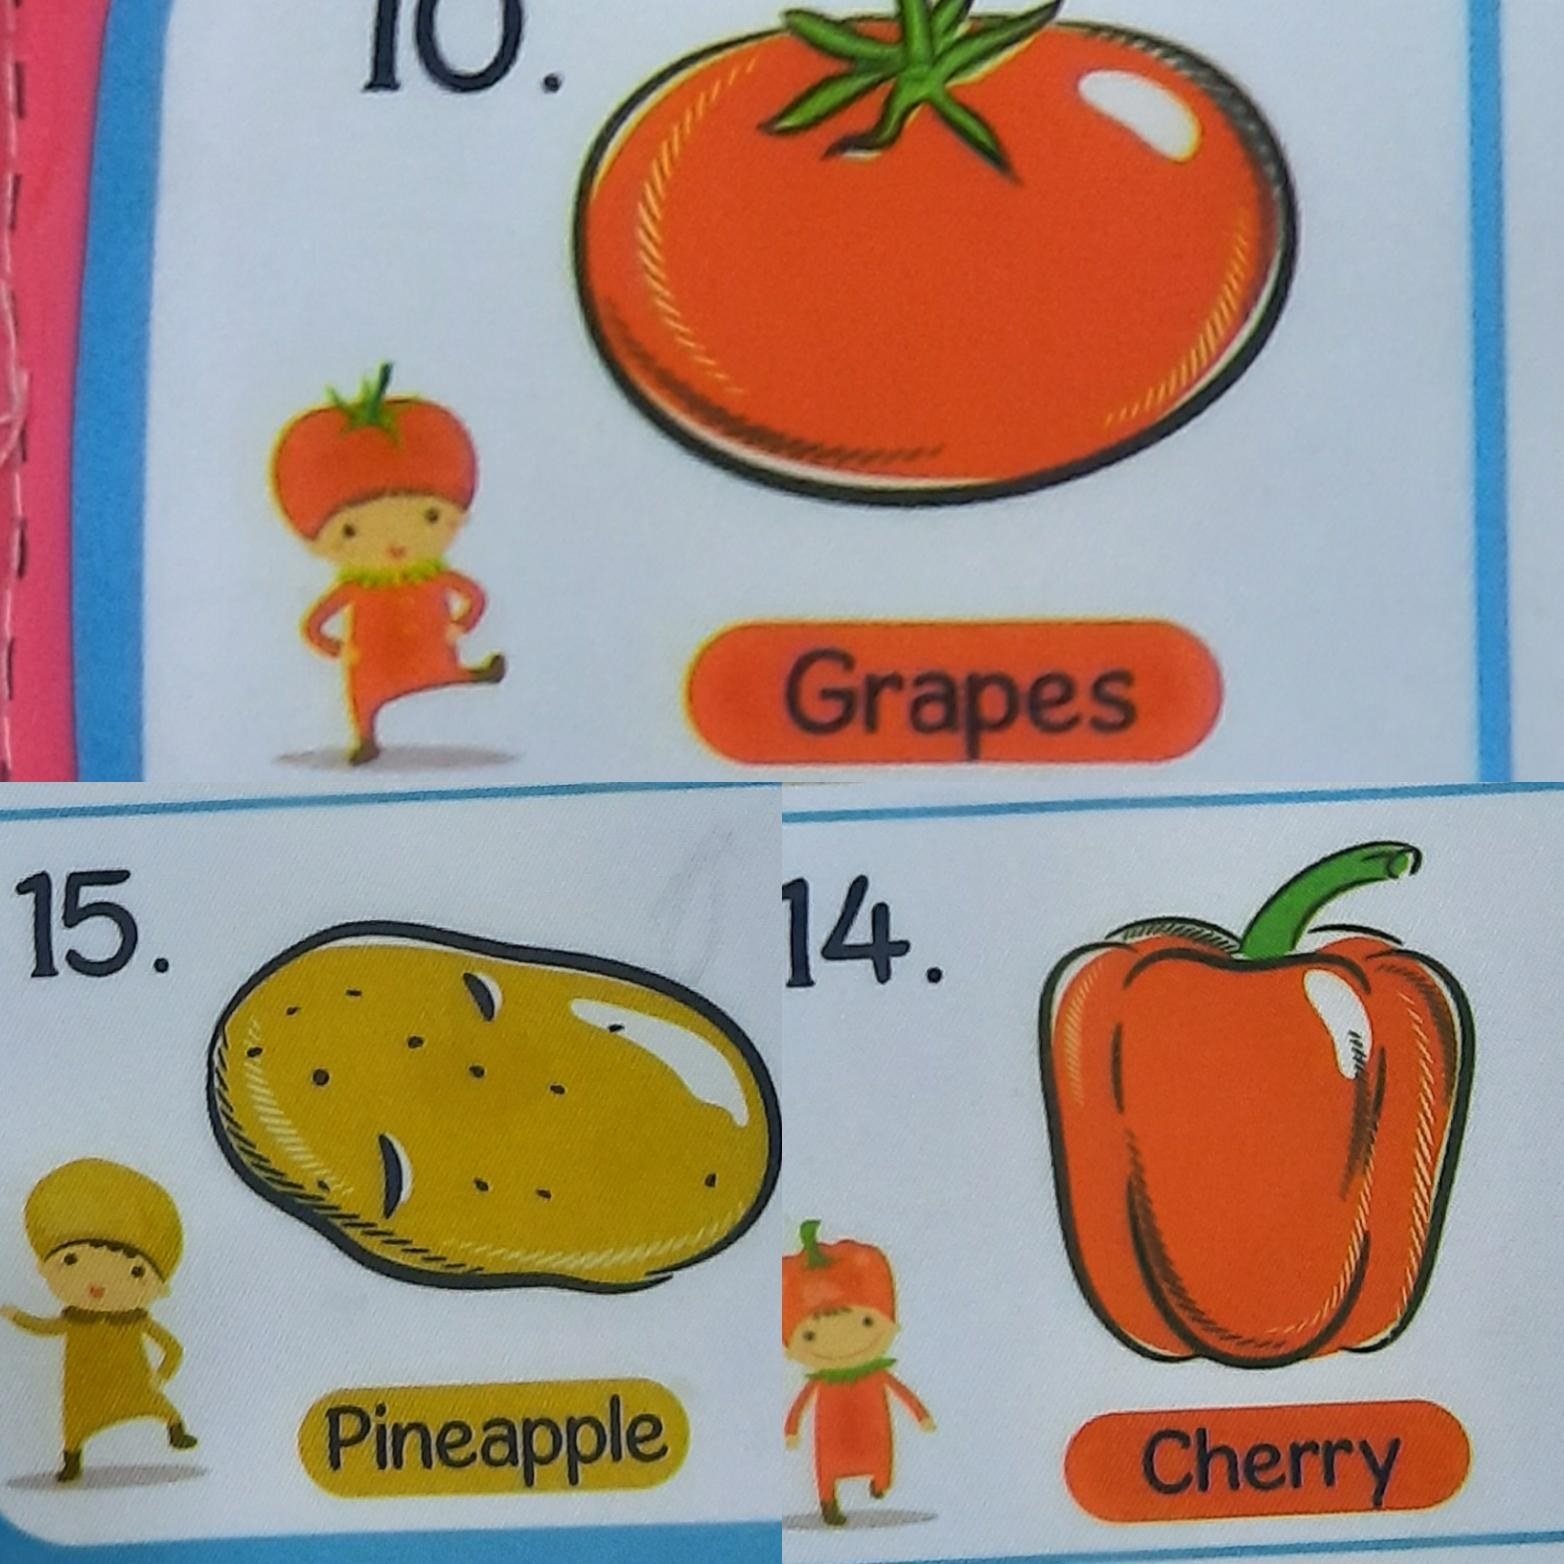 &quot;Pineapple&quot; label for a potato, &quot;grapes&quot; for a tomato, and &quot;cherry&quot; for a red bell pepper